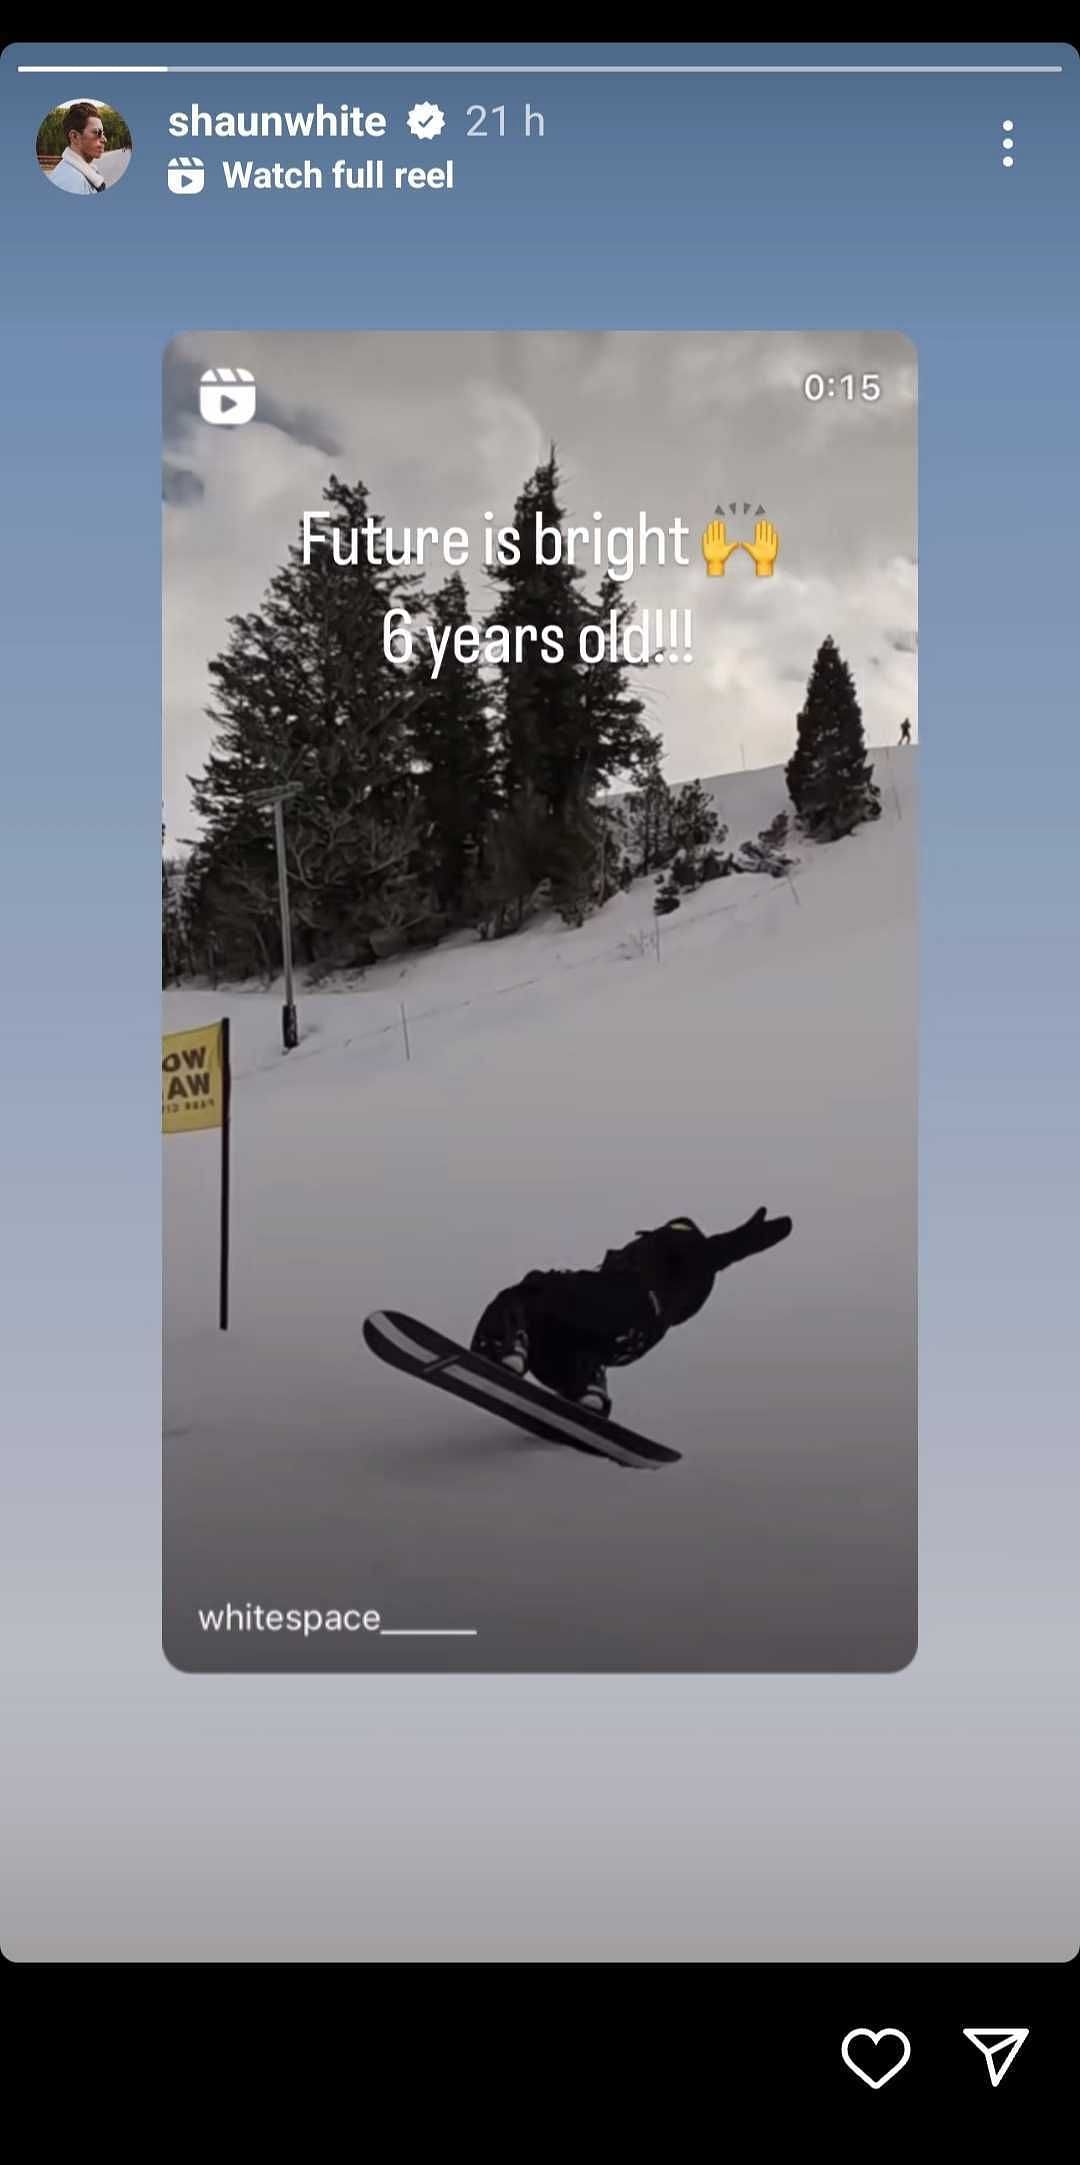 Shaun White showed his amazement on his Instagram stories.